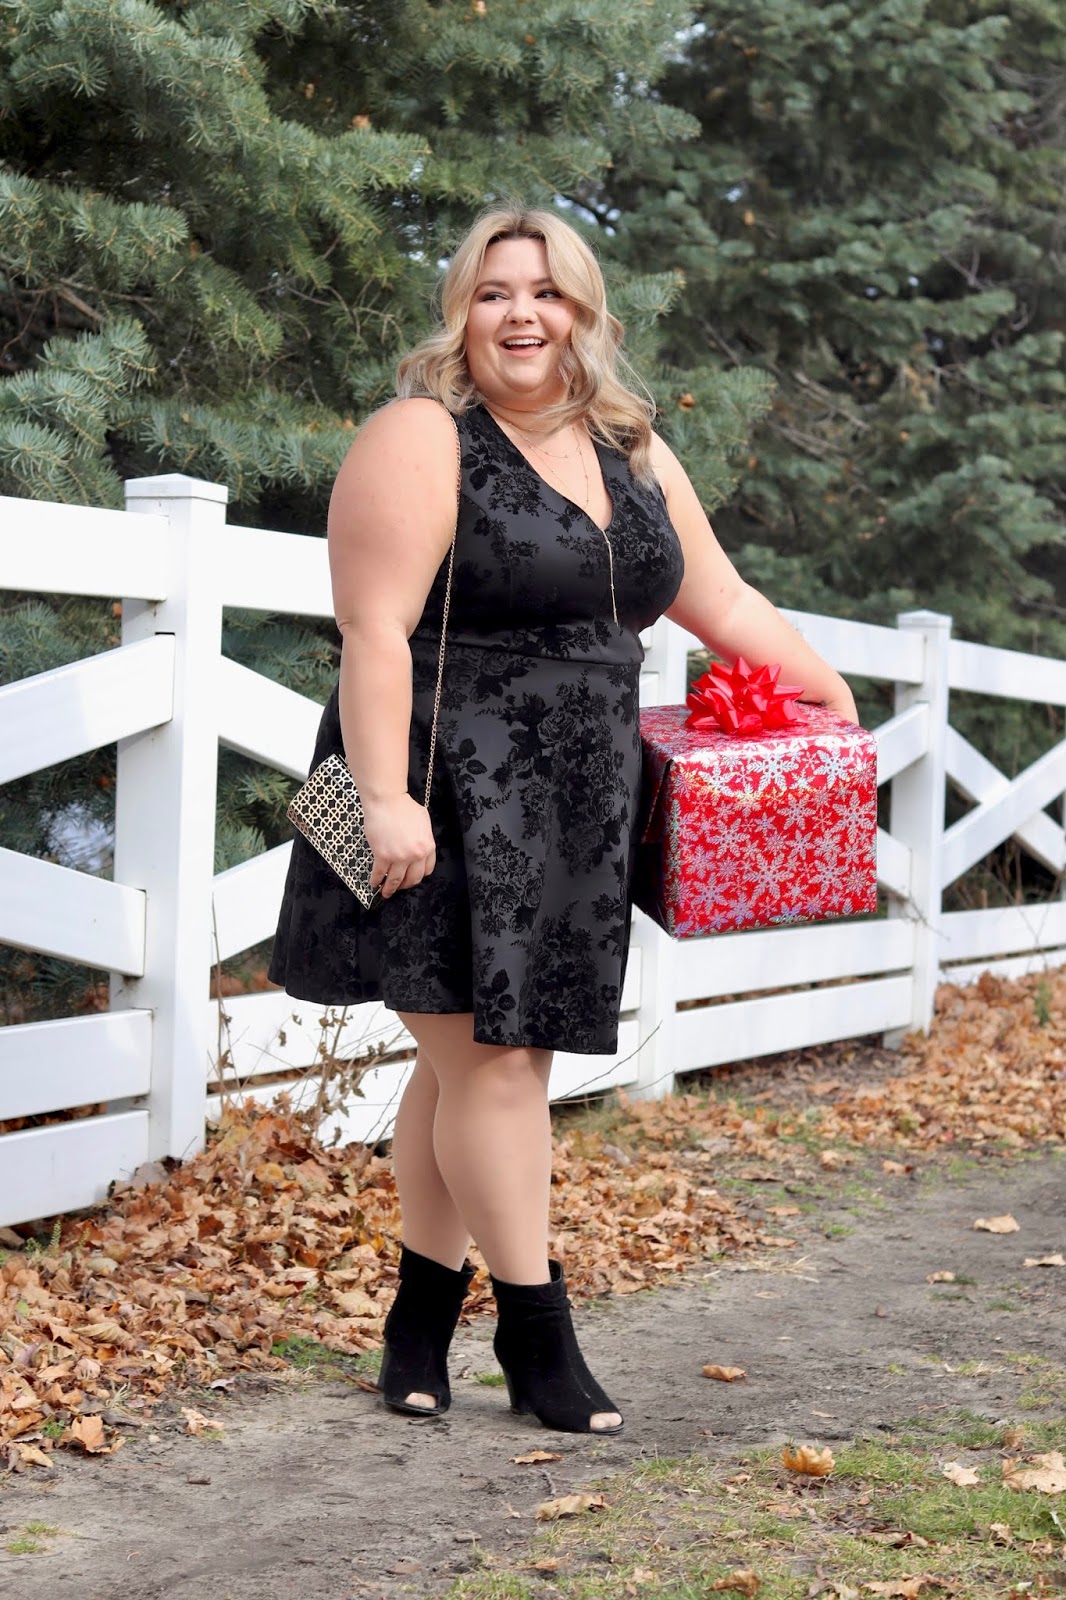 Plus Size Holiday Outfits - Natalie in the City